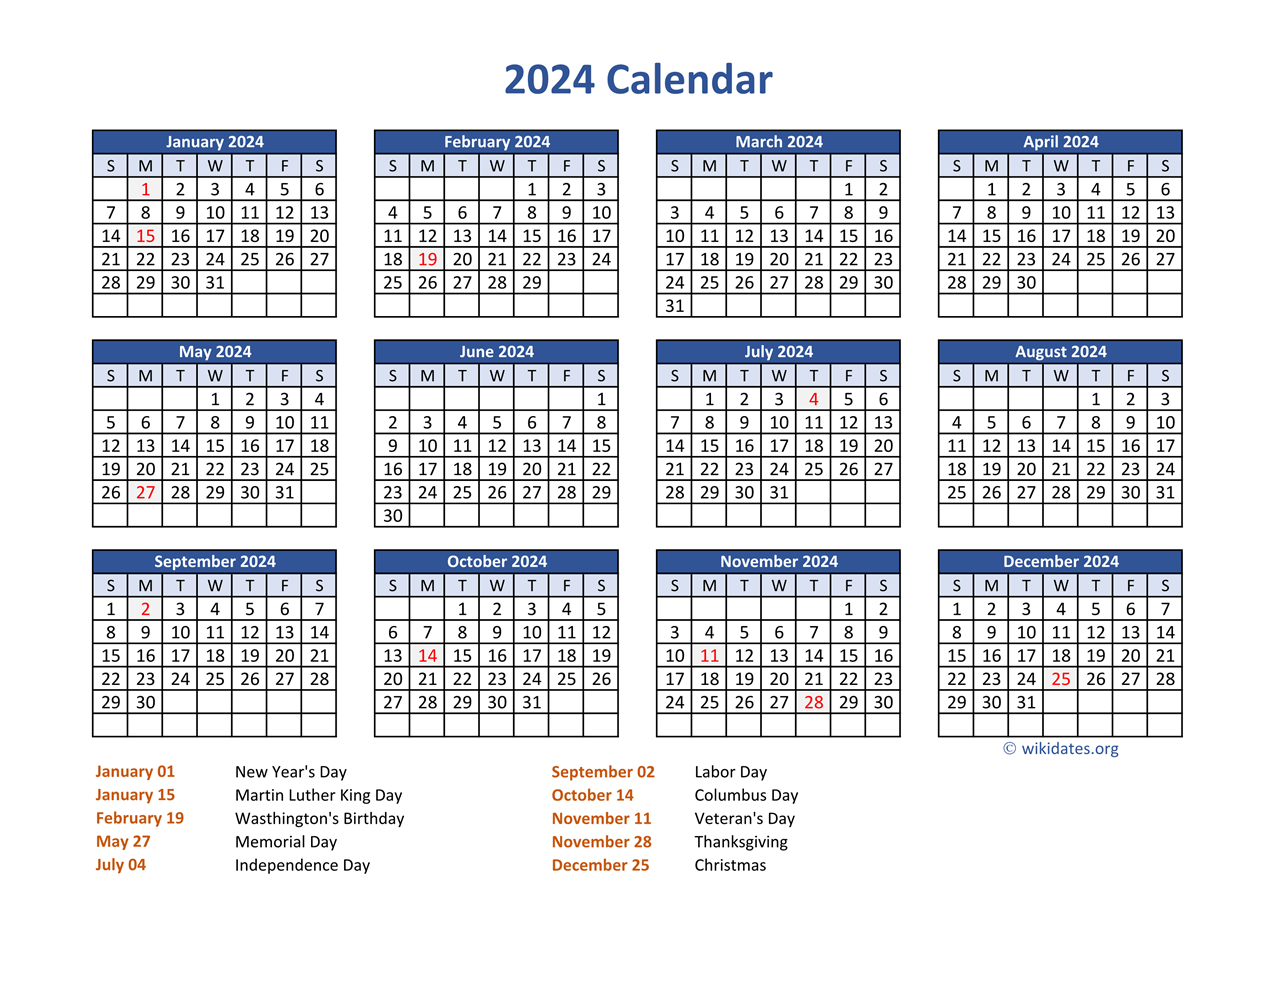 Pdf Calendar 2024 With Federal Holidays | Wikidates for Printable 2024 Calendar One Page With Holidays